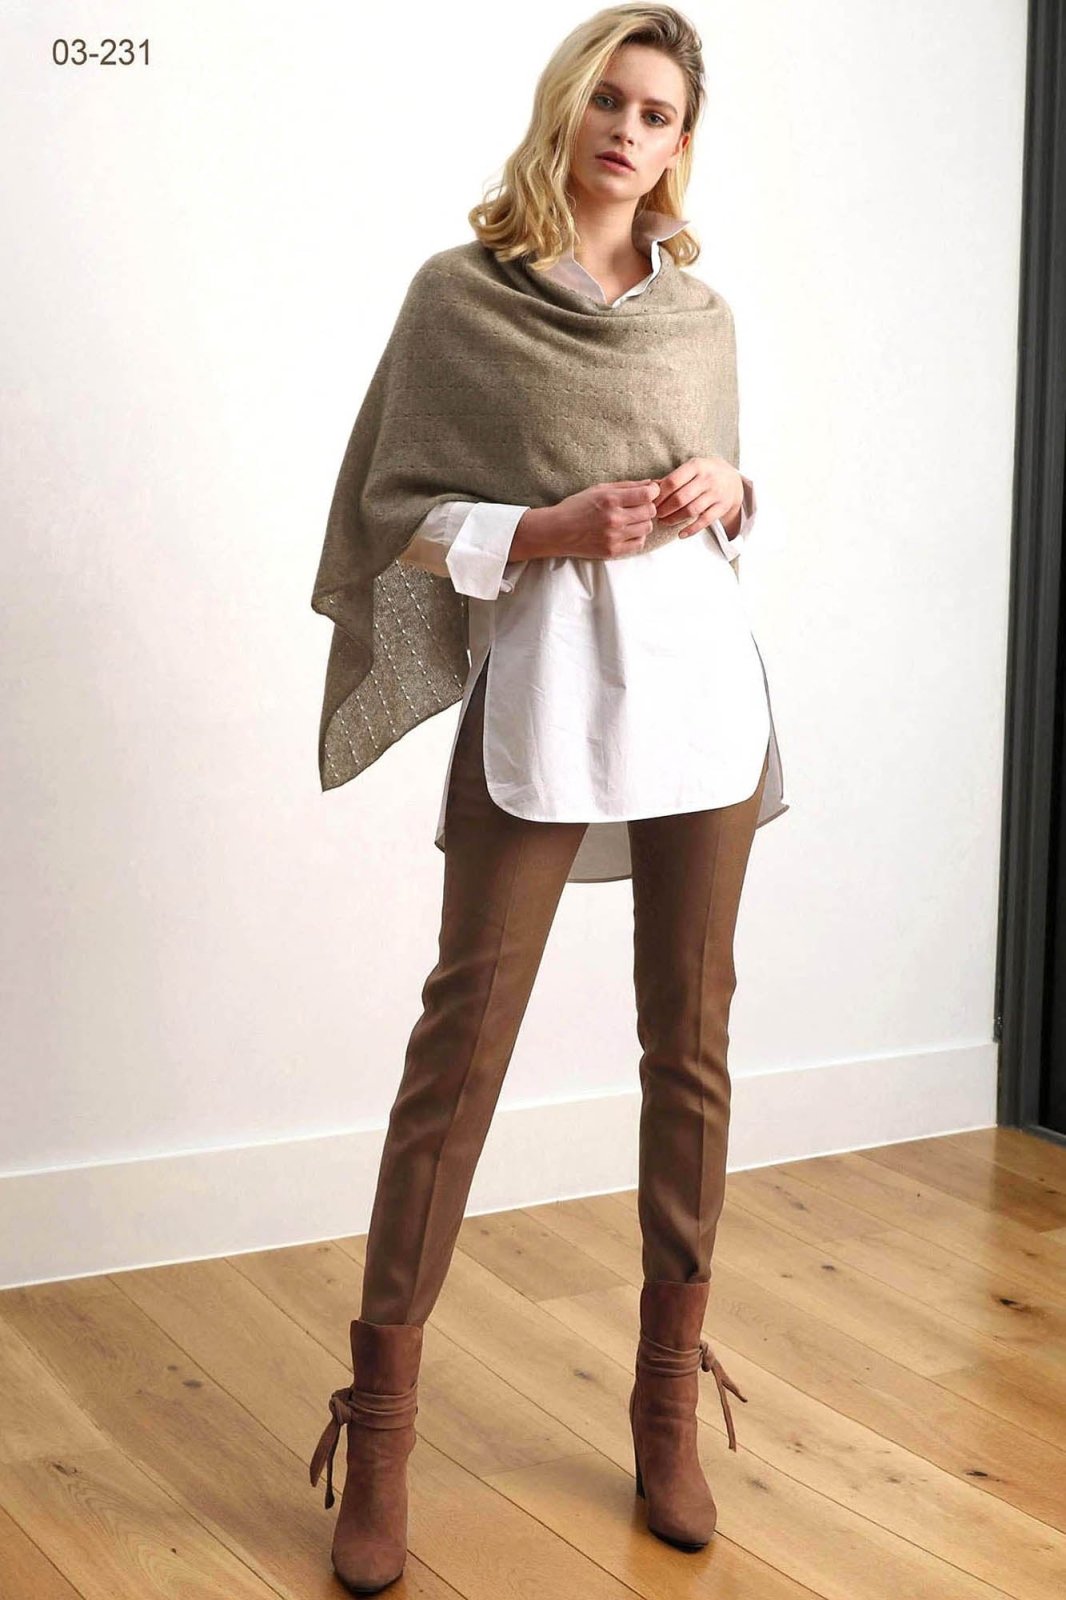 Silver grey cashmere poncho Multiway